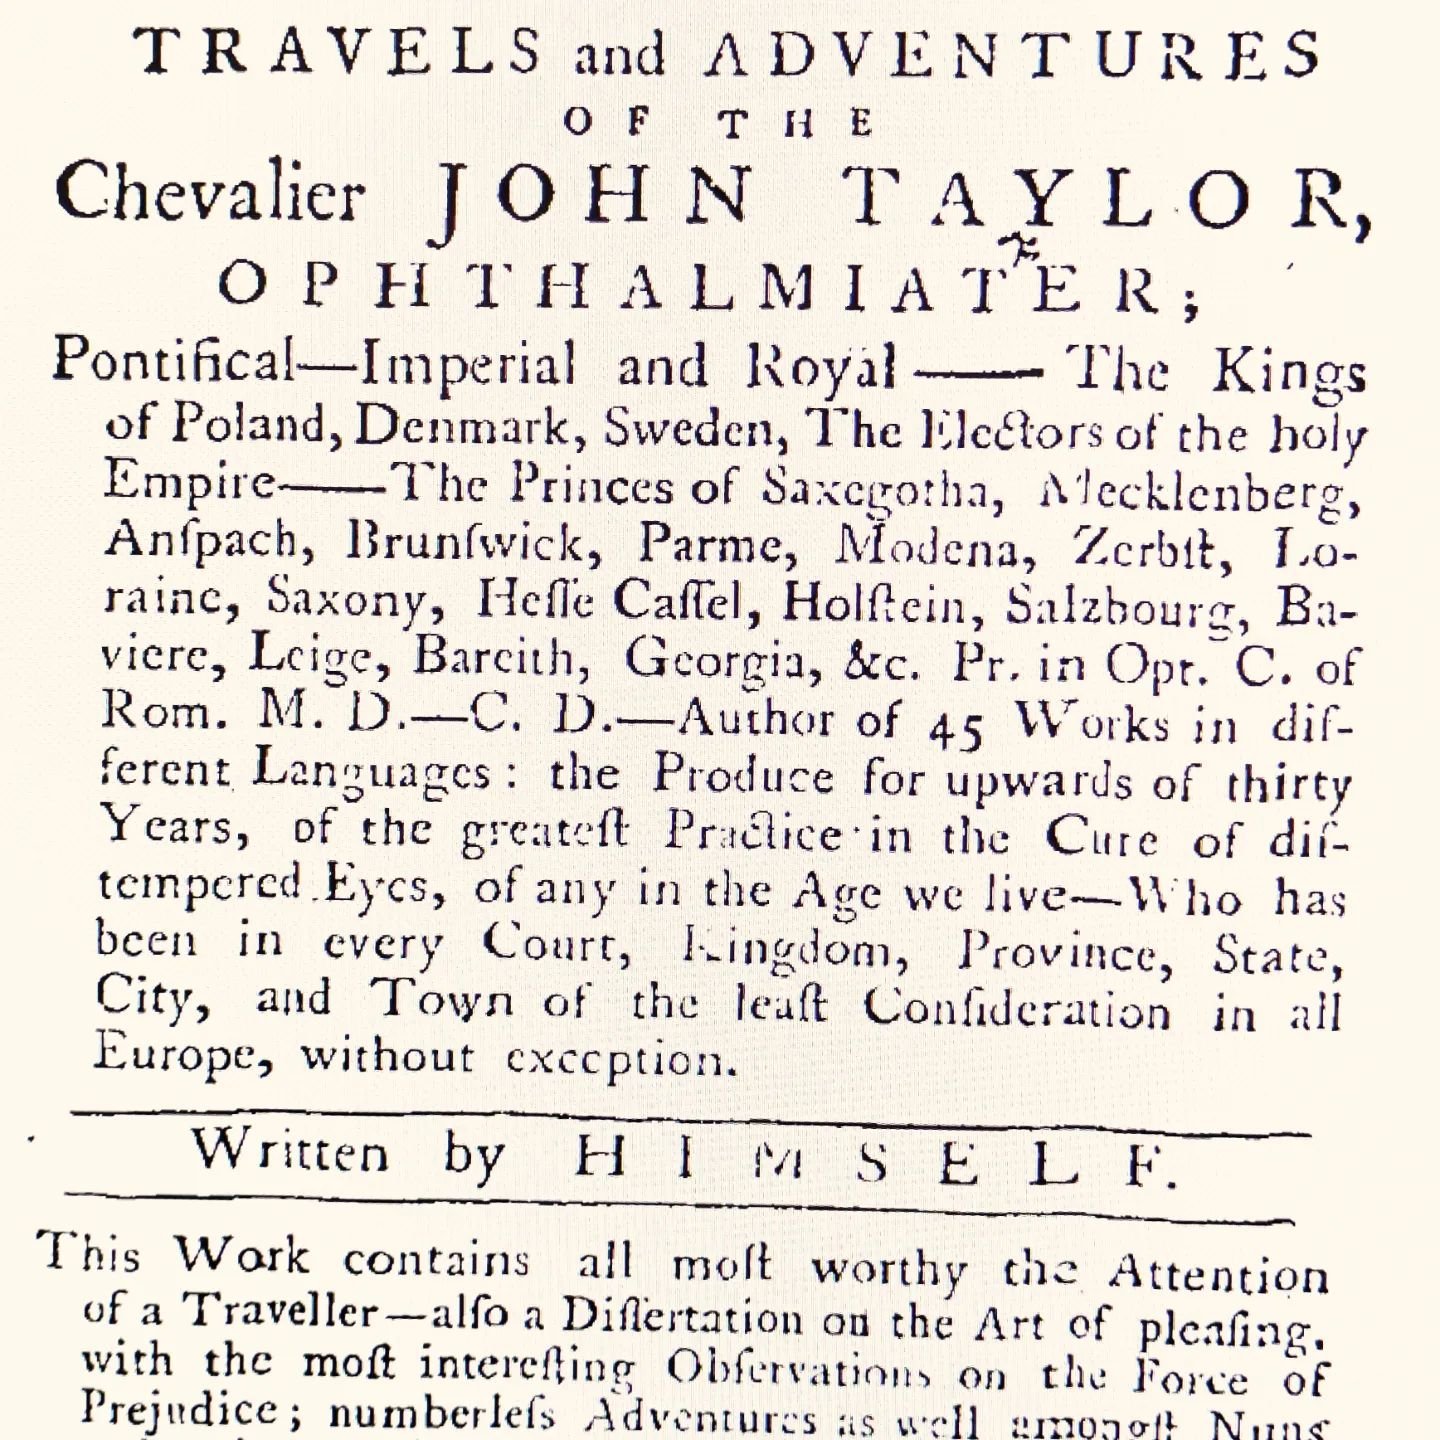 HOW IT STARTED: a strange 18th century autobiography, written by a fraudulent aristocrat.
HOW IT'S GOING: 250 years later, the truth is finally published! (Last chance to get preorder discount!)